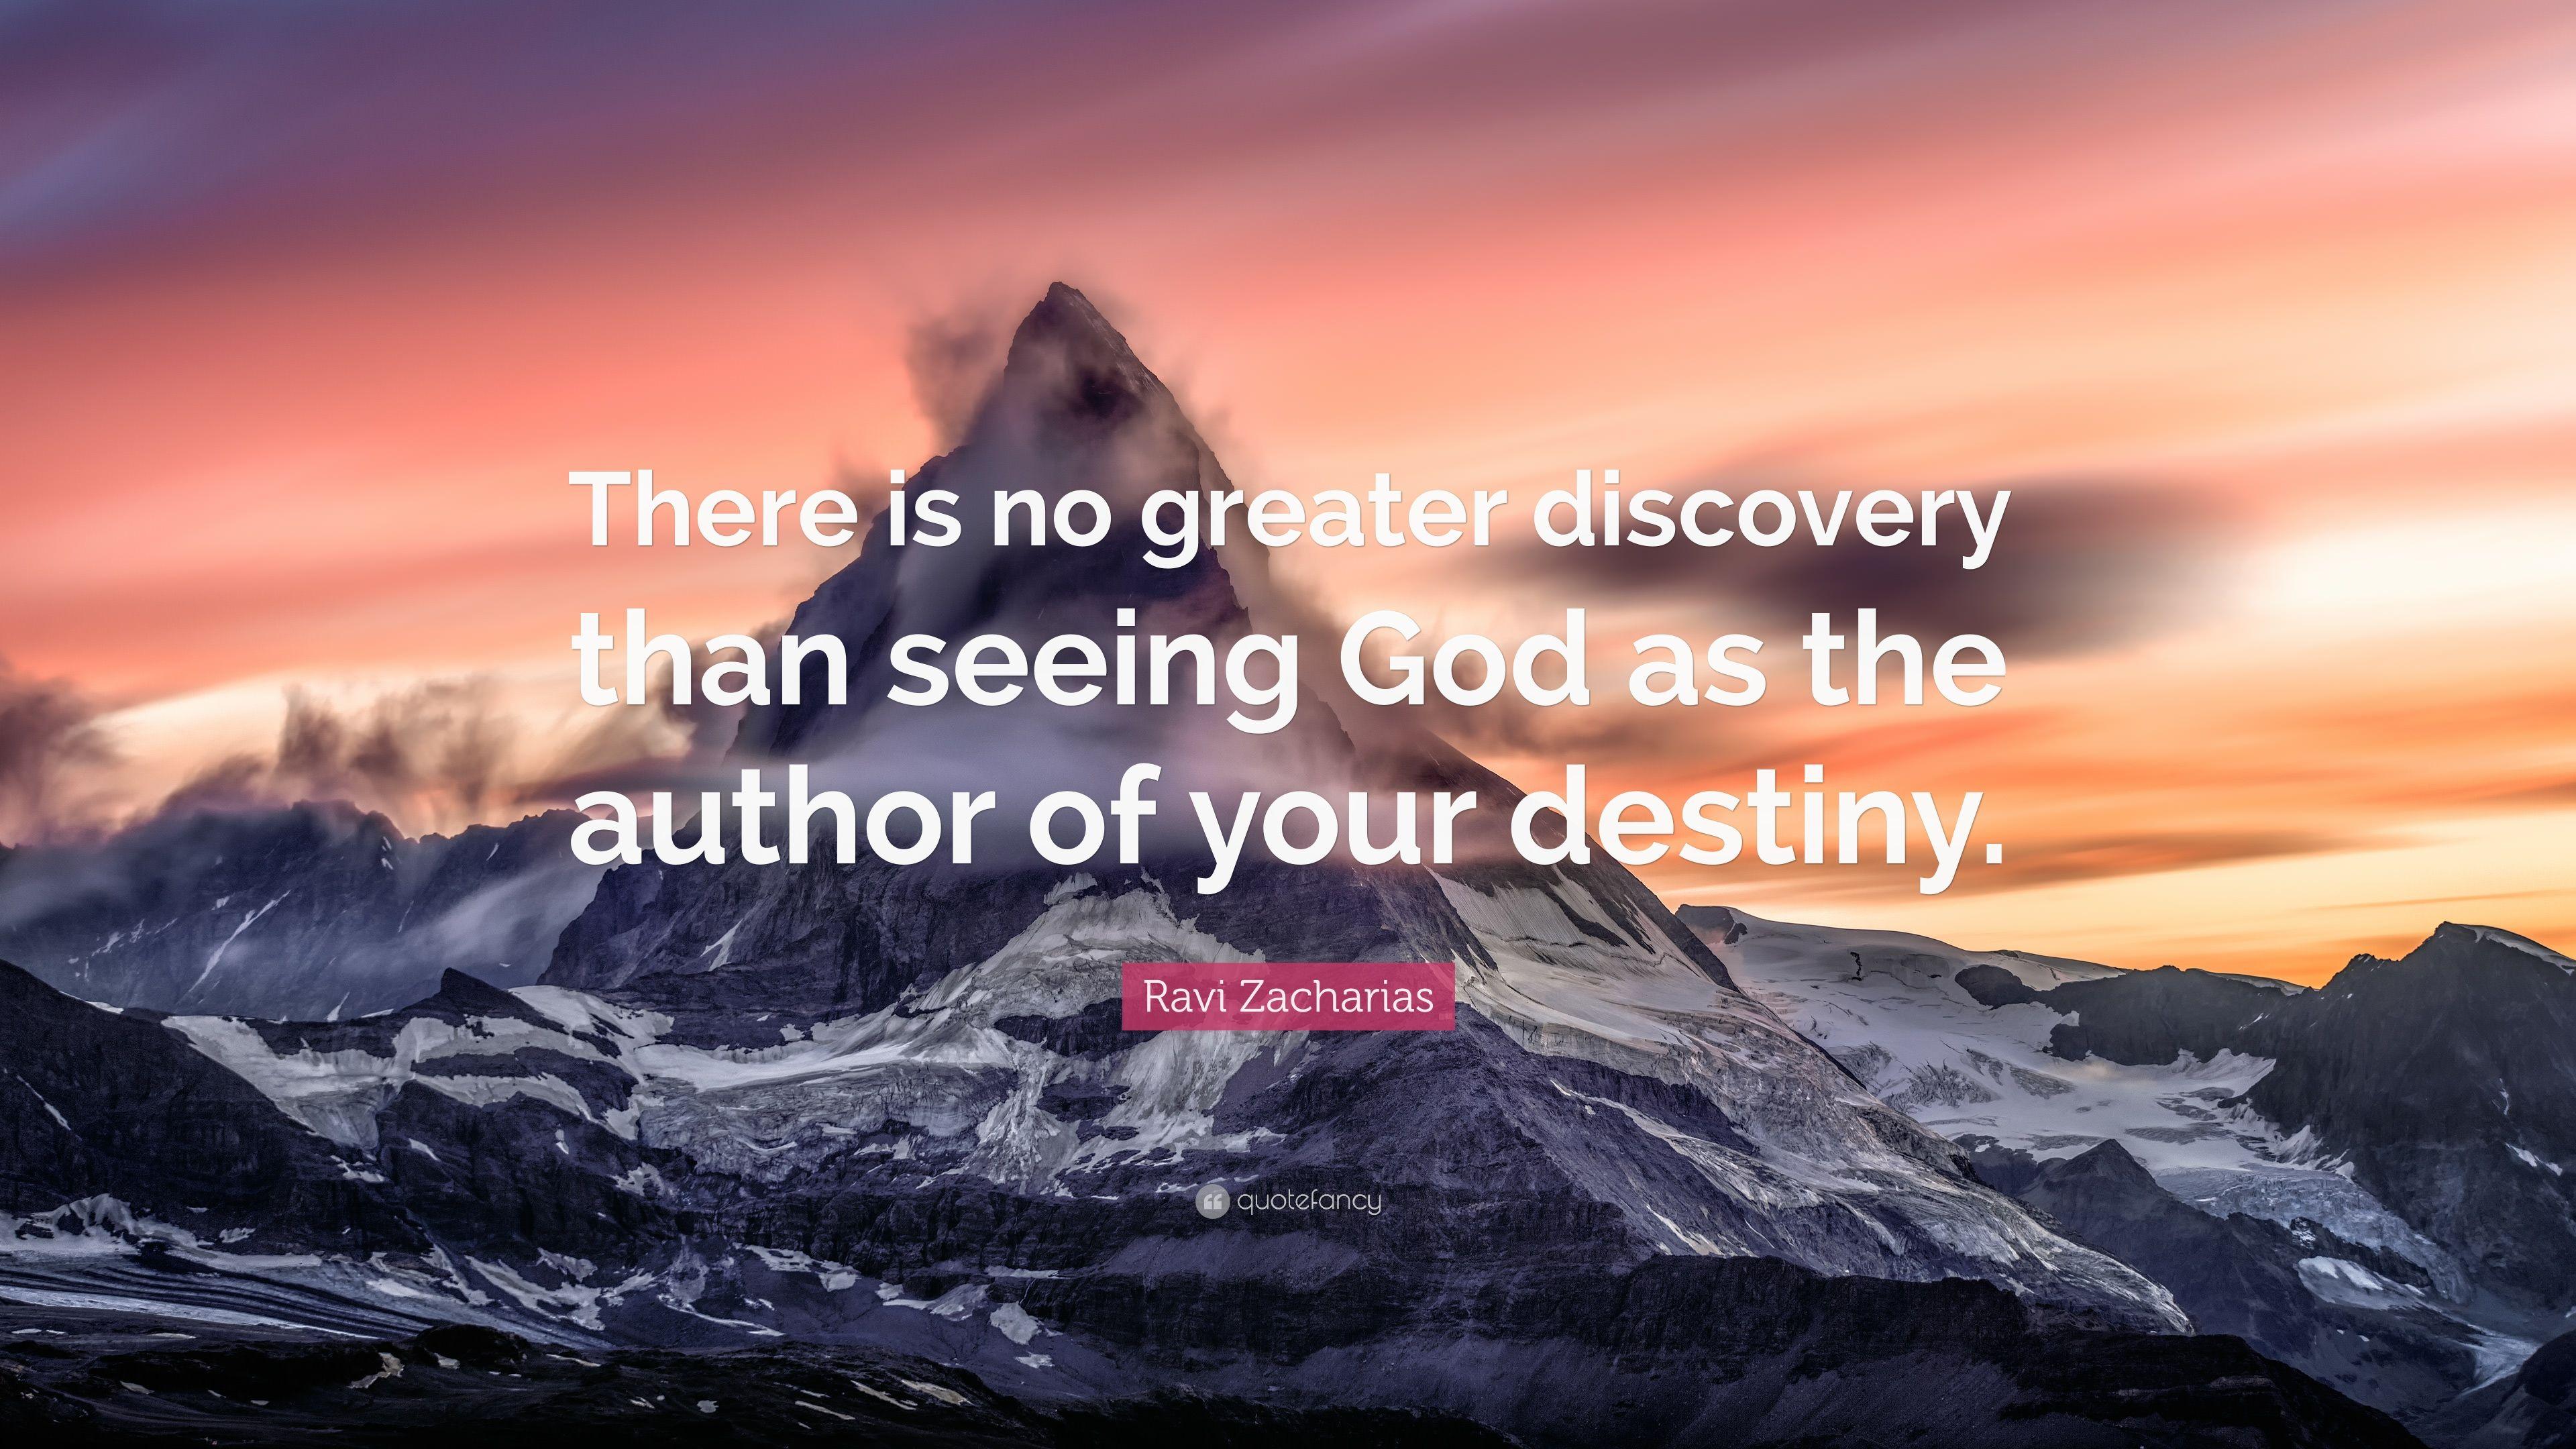 Ravi Zacharias Quote: “There is no greater discovery than seeing God